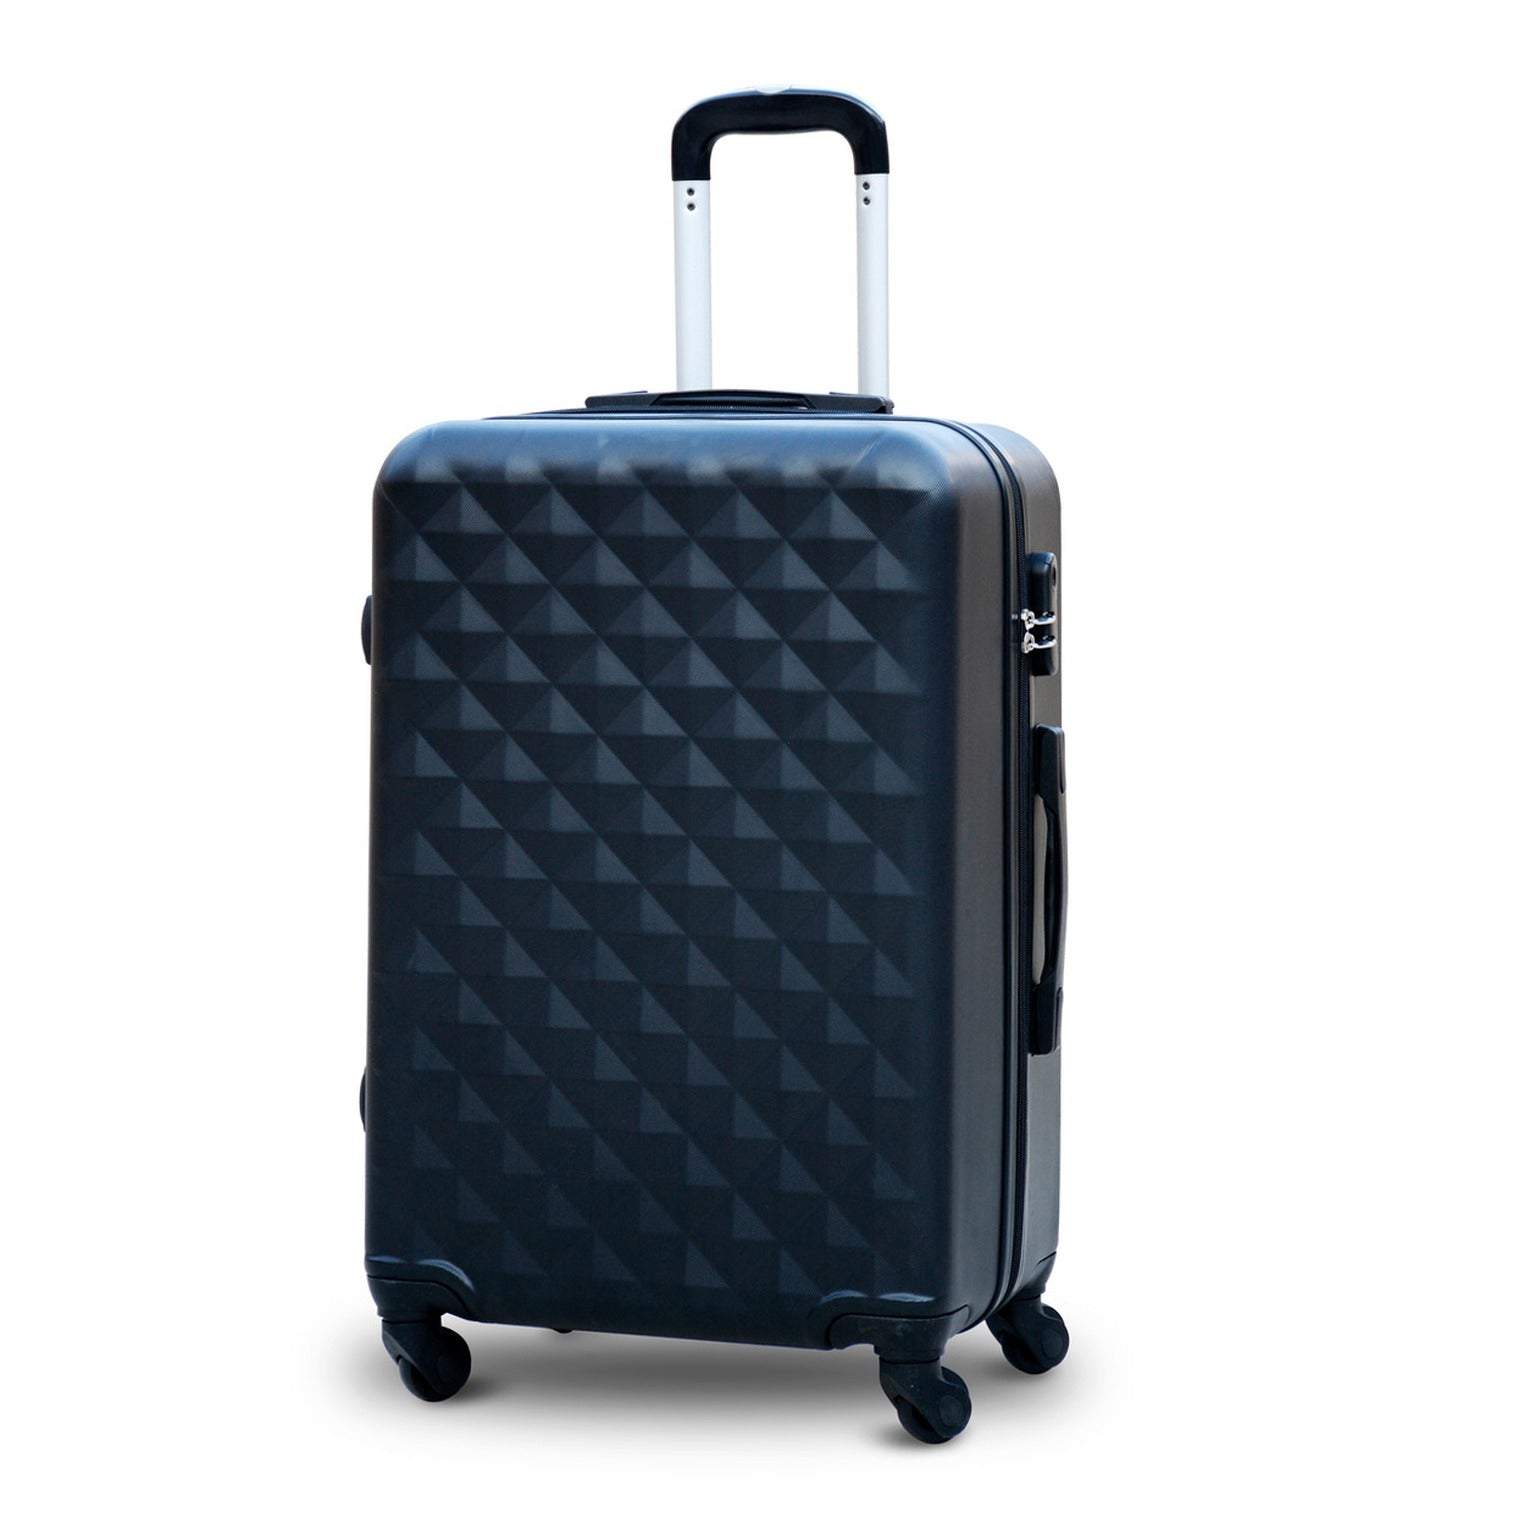 28" Diamond Cut ABS Lightweight Luggage Bag With Spinner Wheel Zaappy